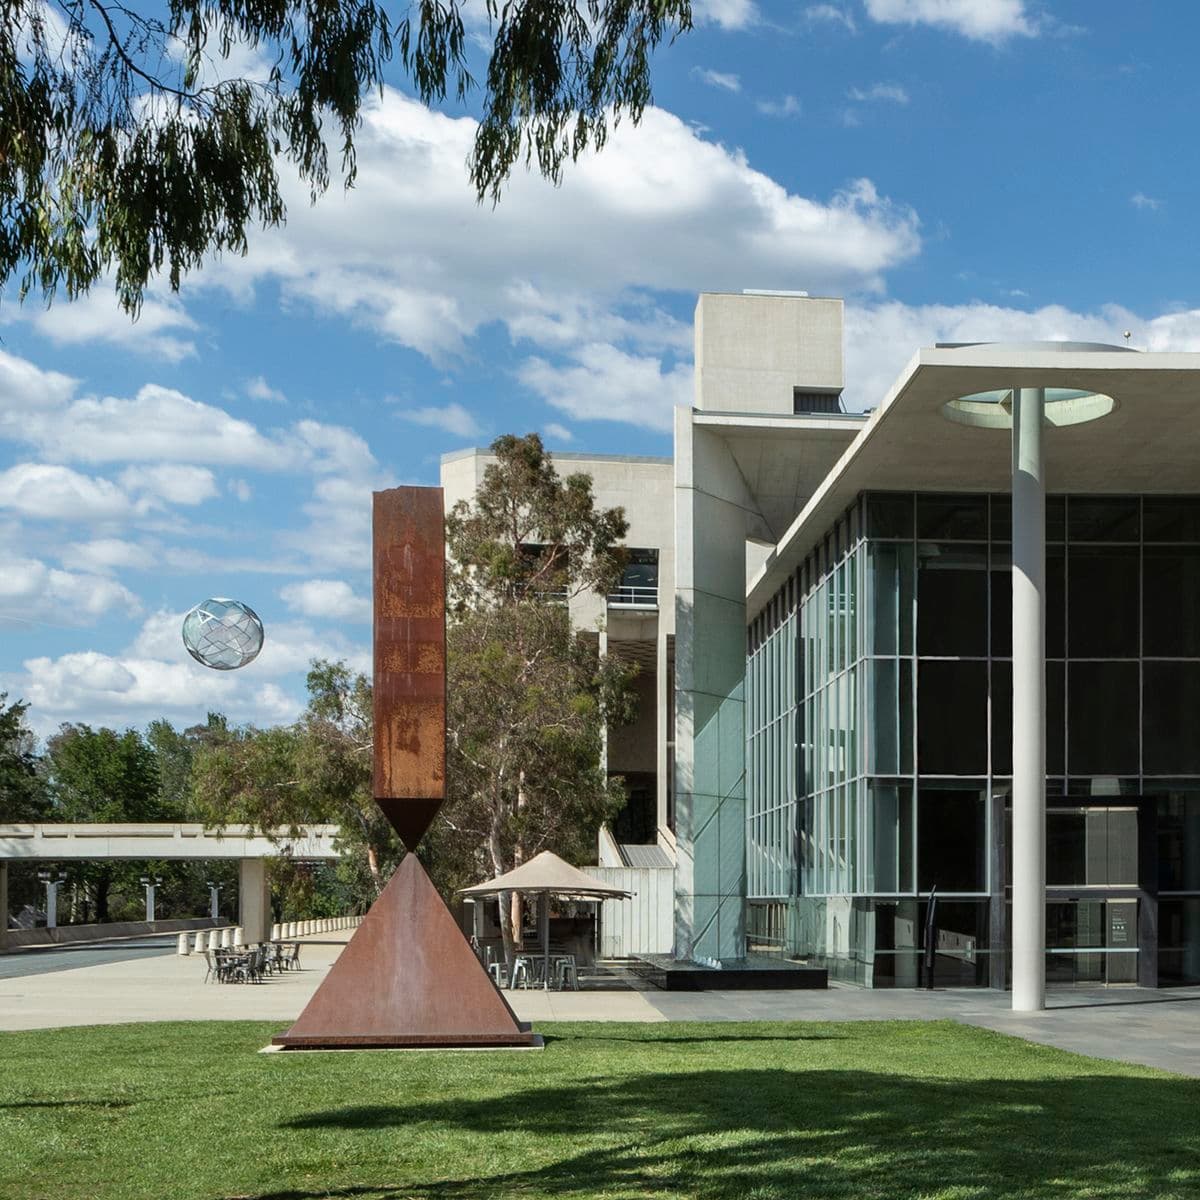 National Gallery of Australia, Canberra - The gift shop for